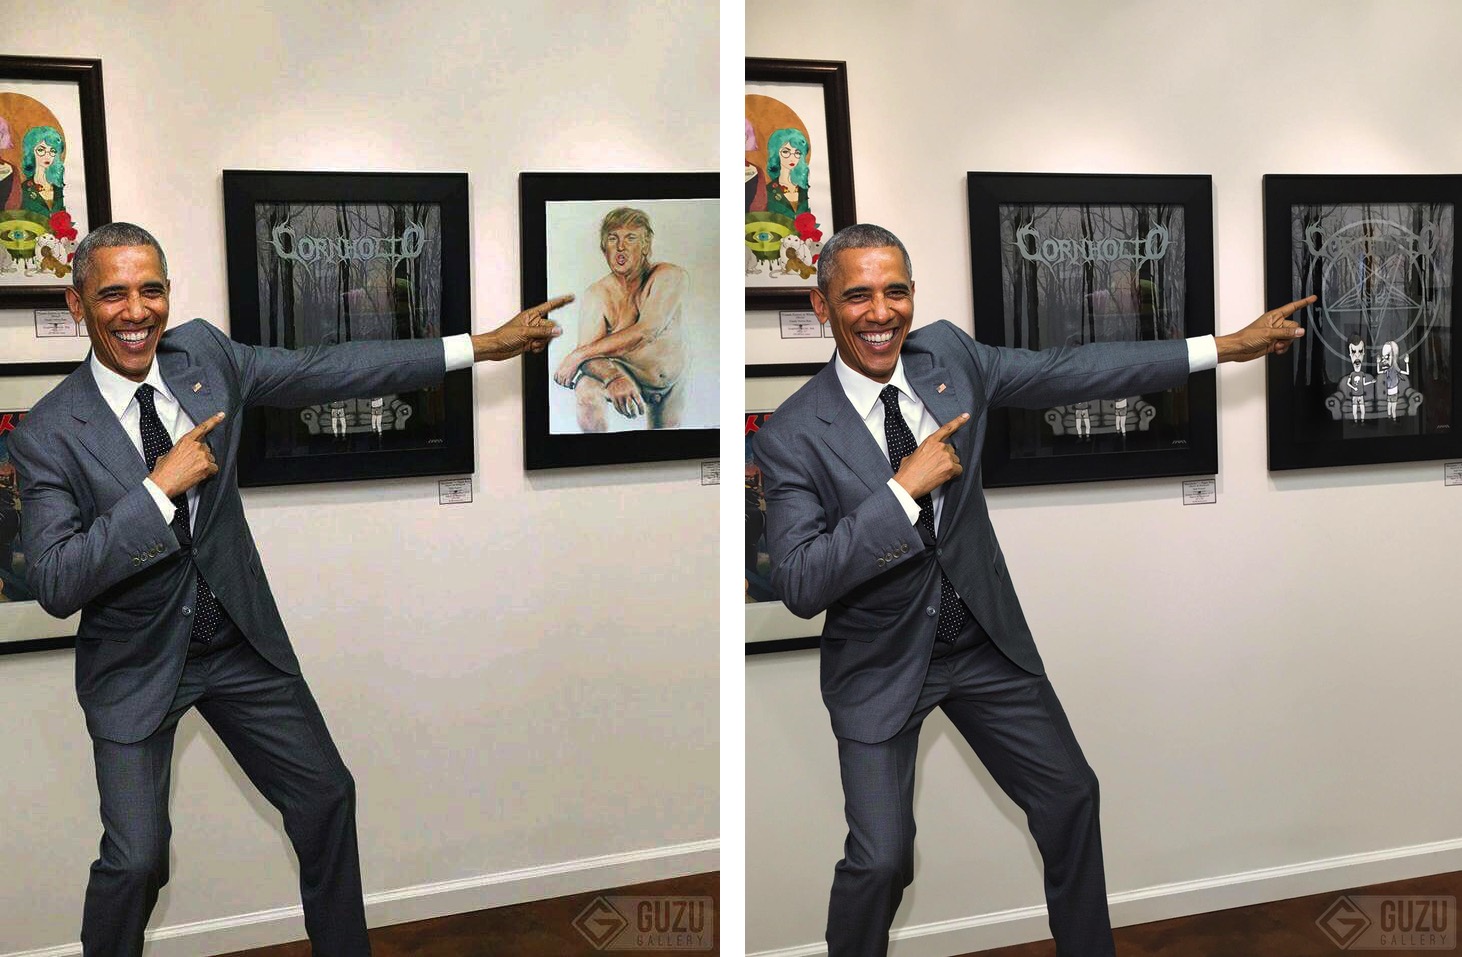 That Photo Of Obama Pointing At A Naked Portrait Of Trump Is Totally Fake (NSFW)